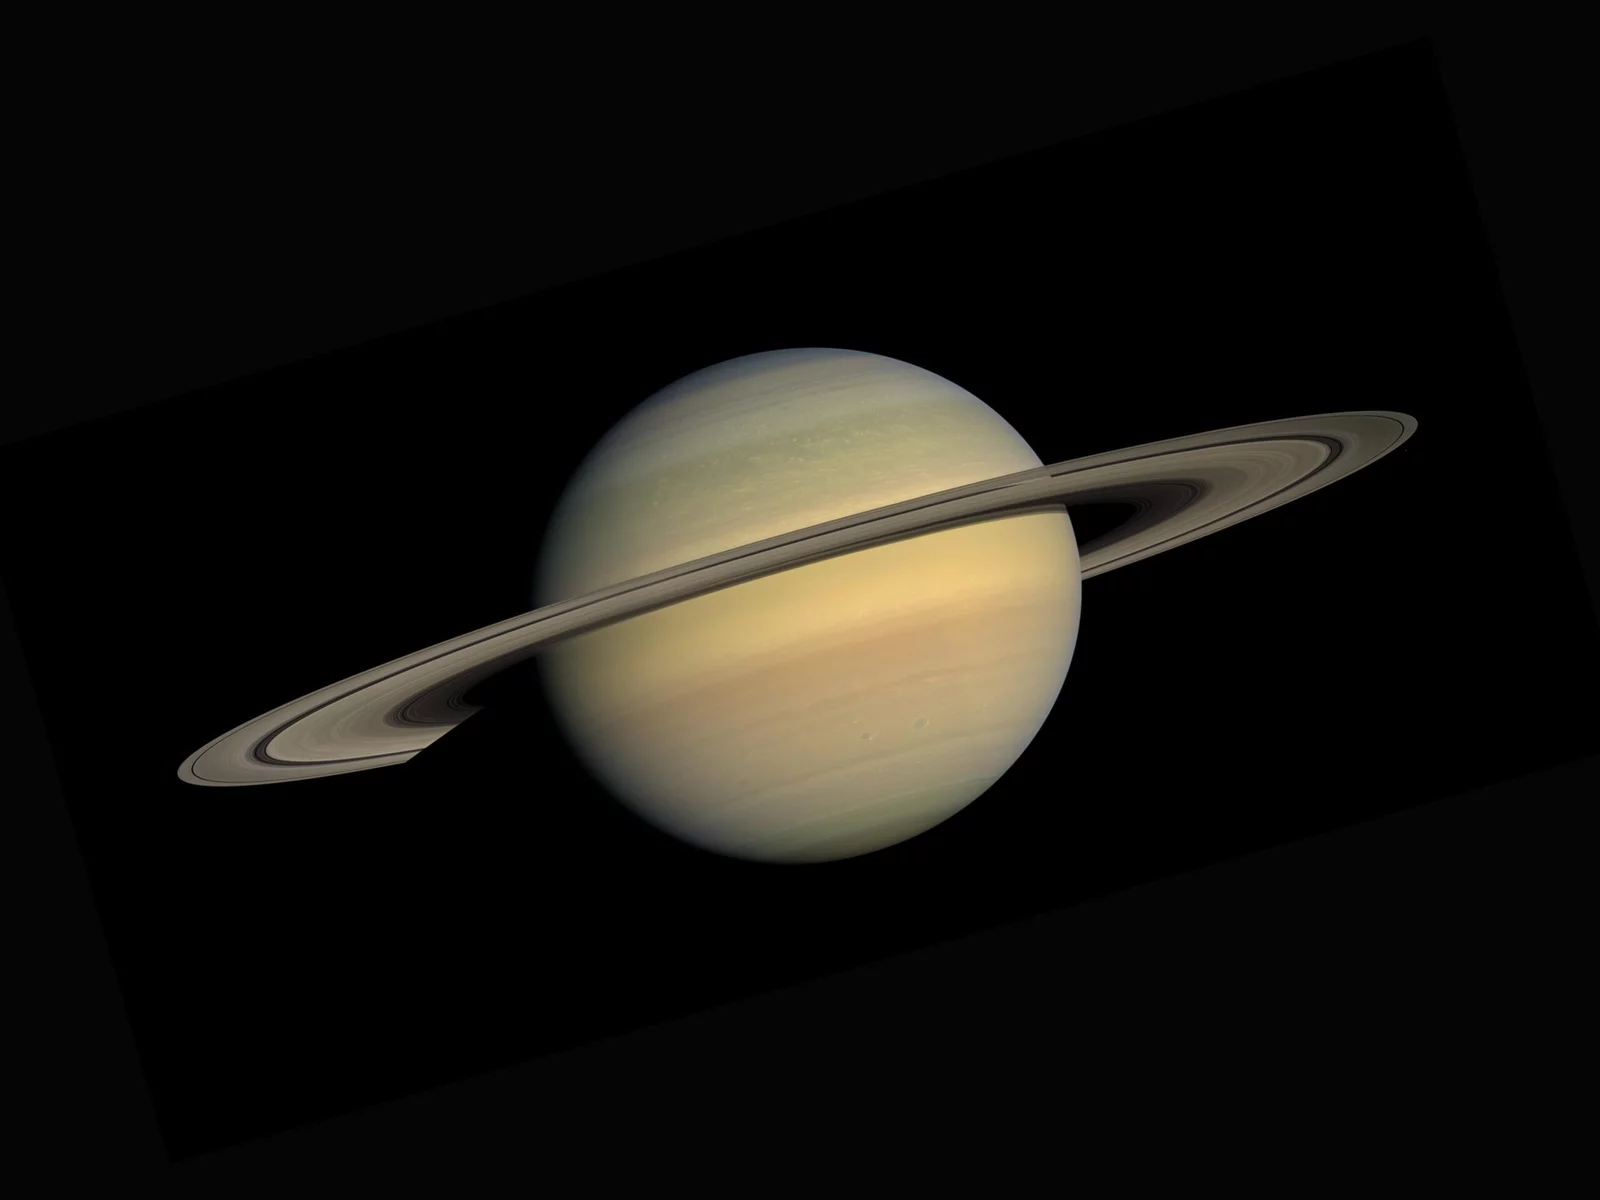 10 Fascinating Facts About Saturn